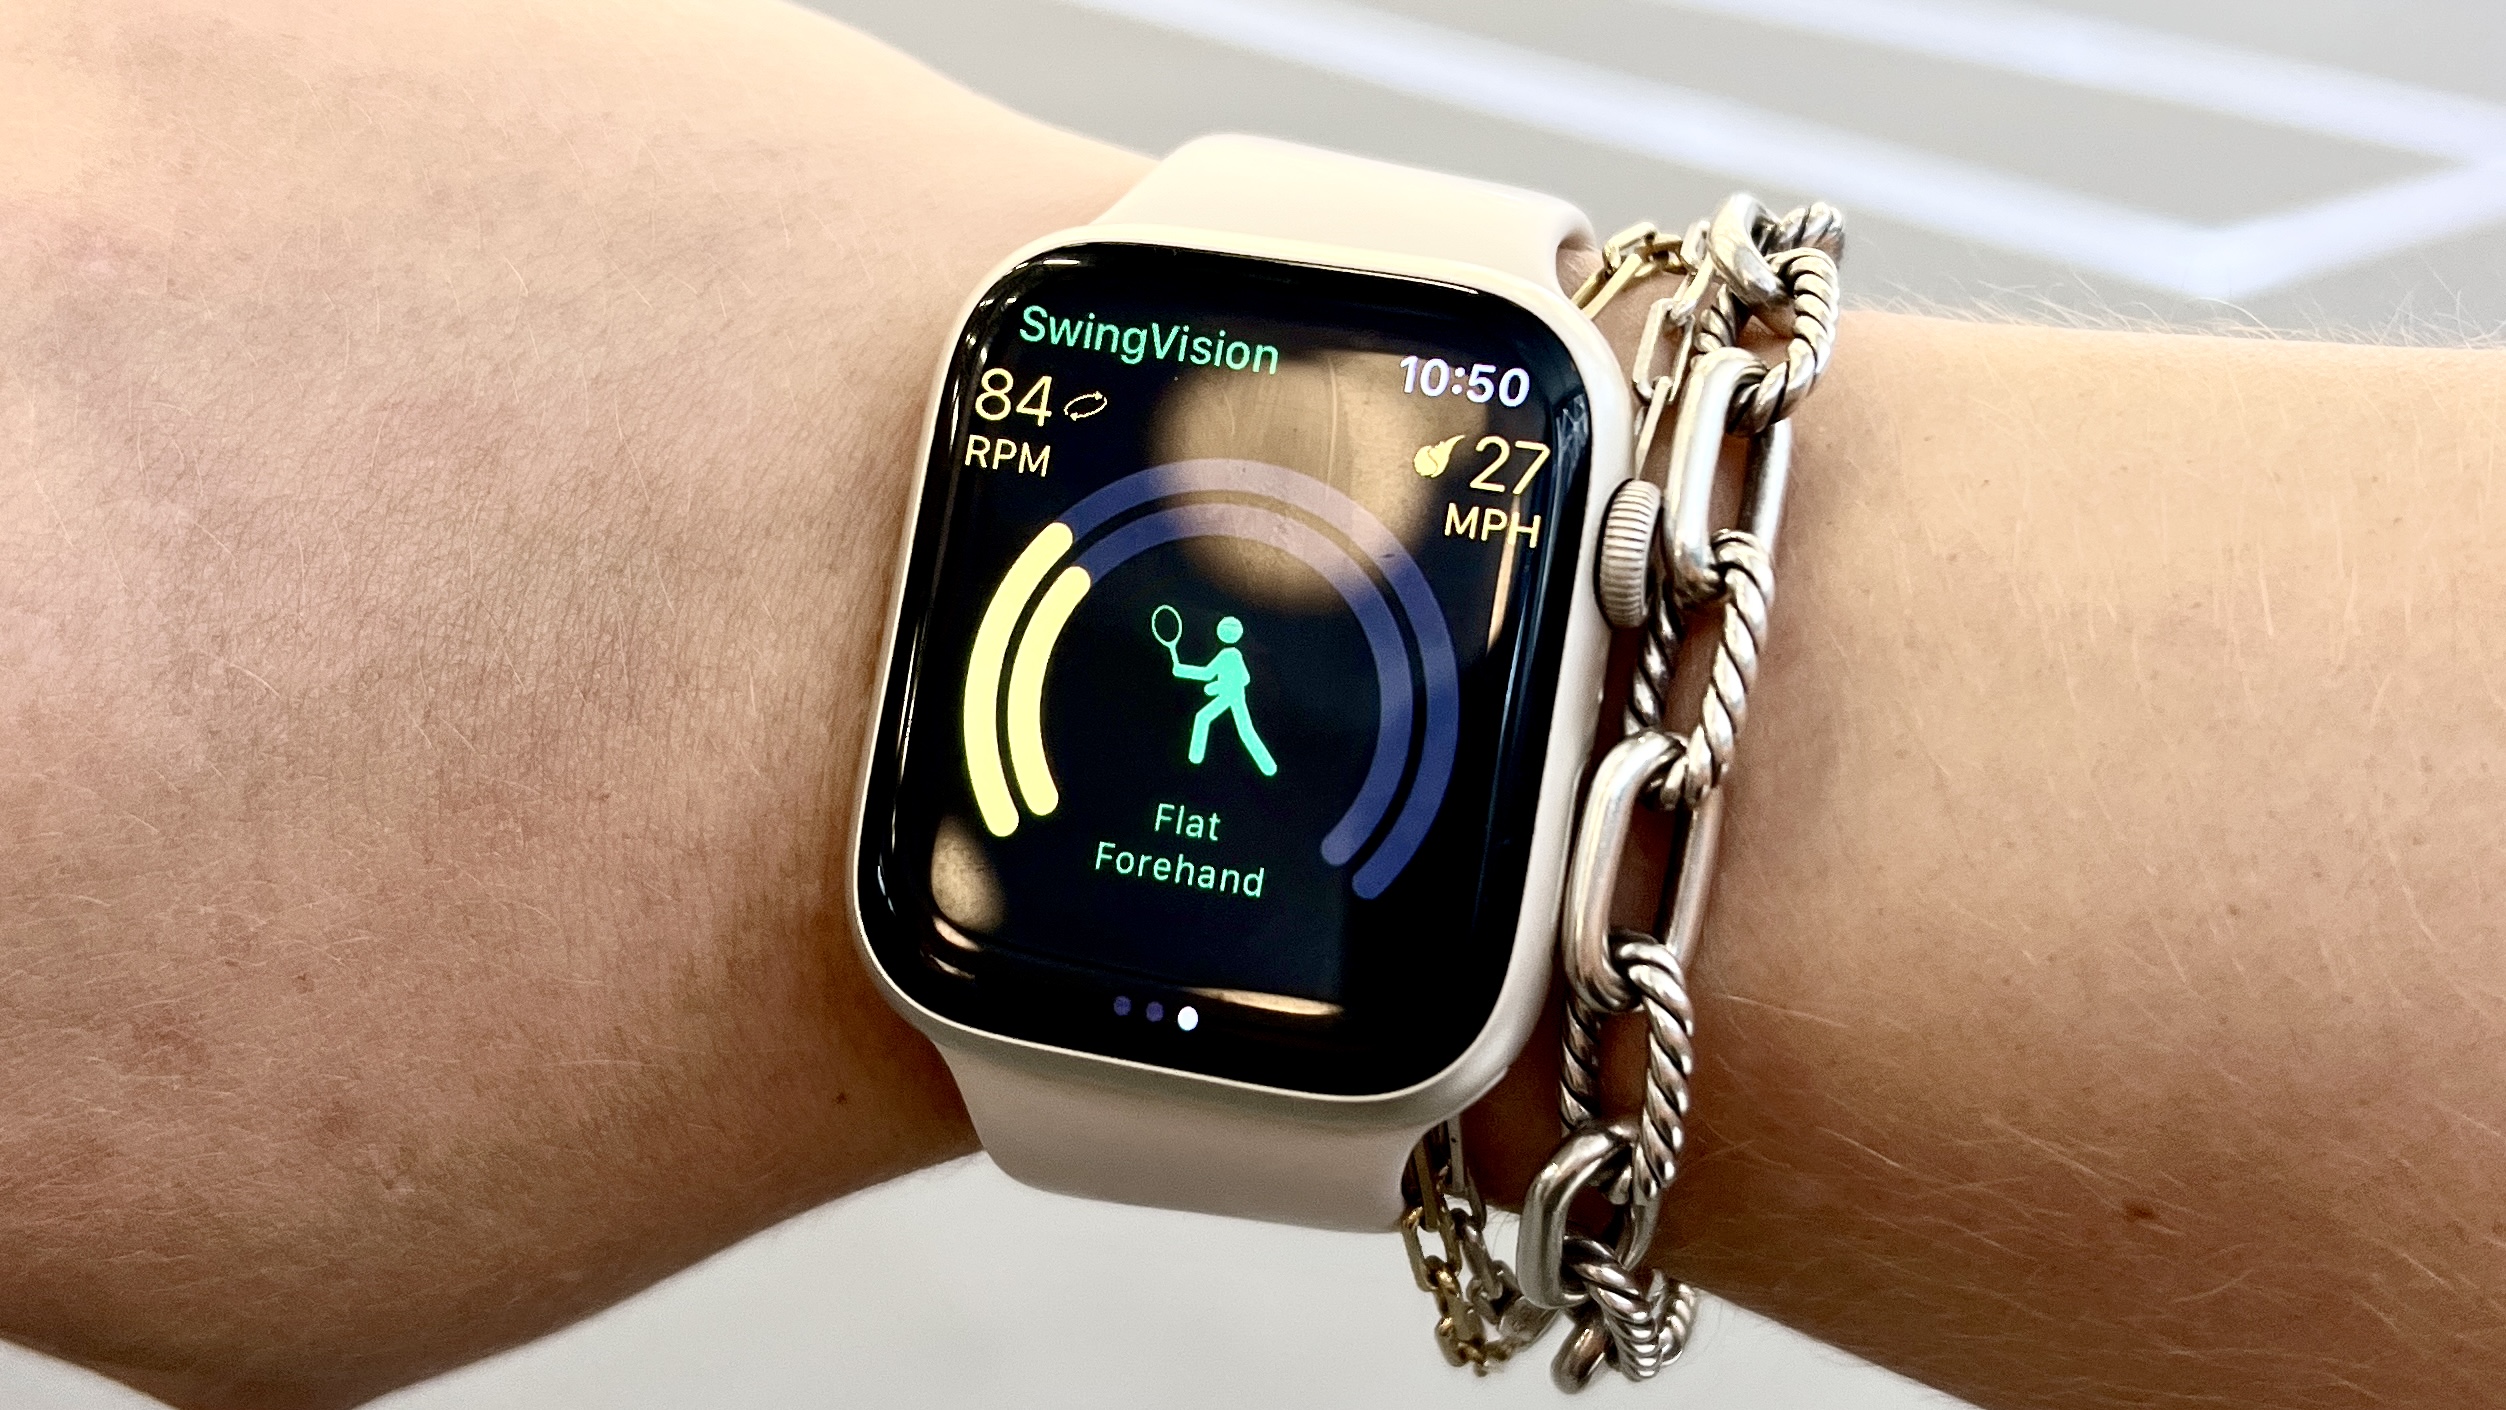 I just tried Apple Watch SwingVision to up my tennis game — here’s what happened